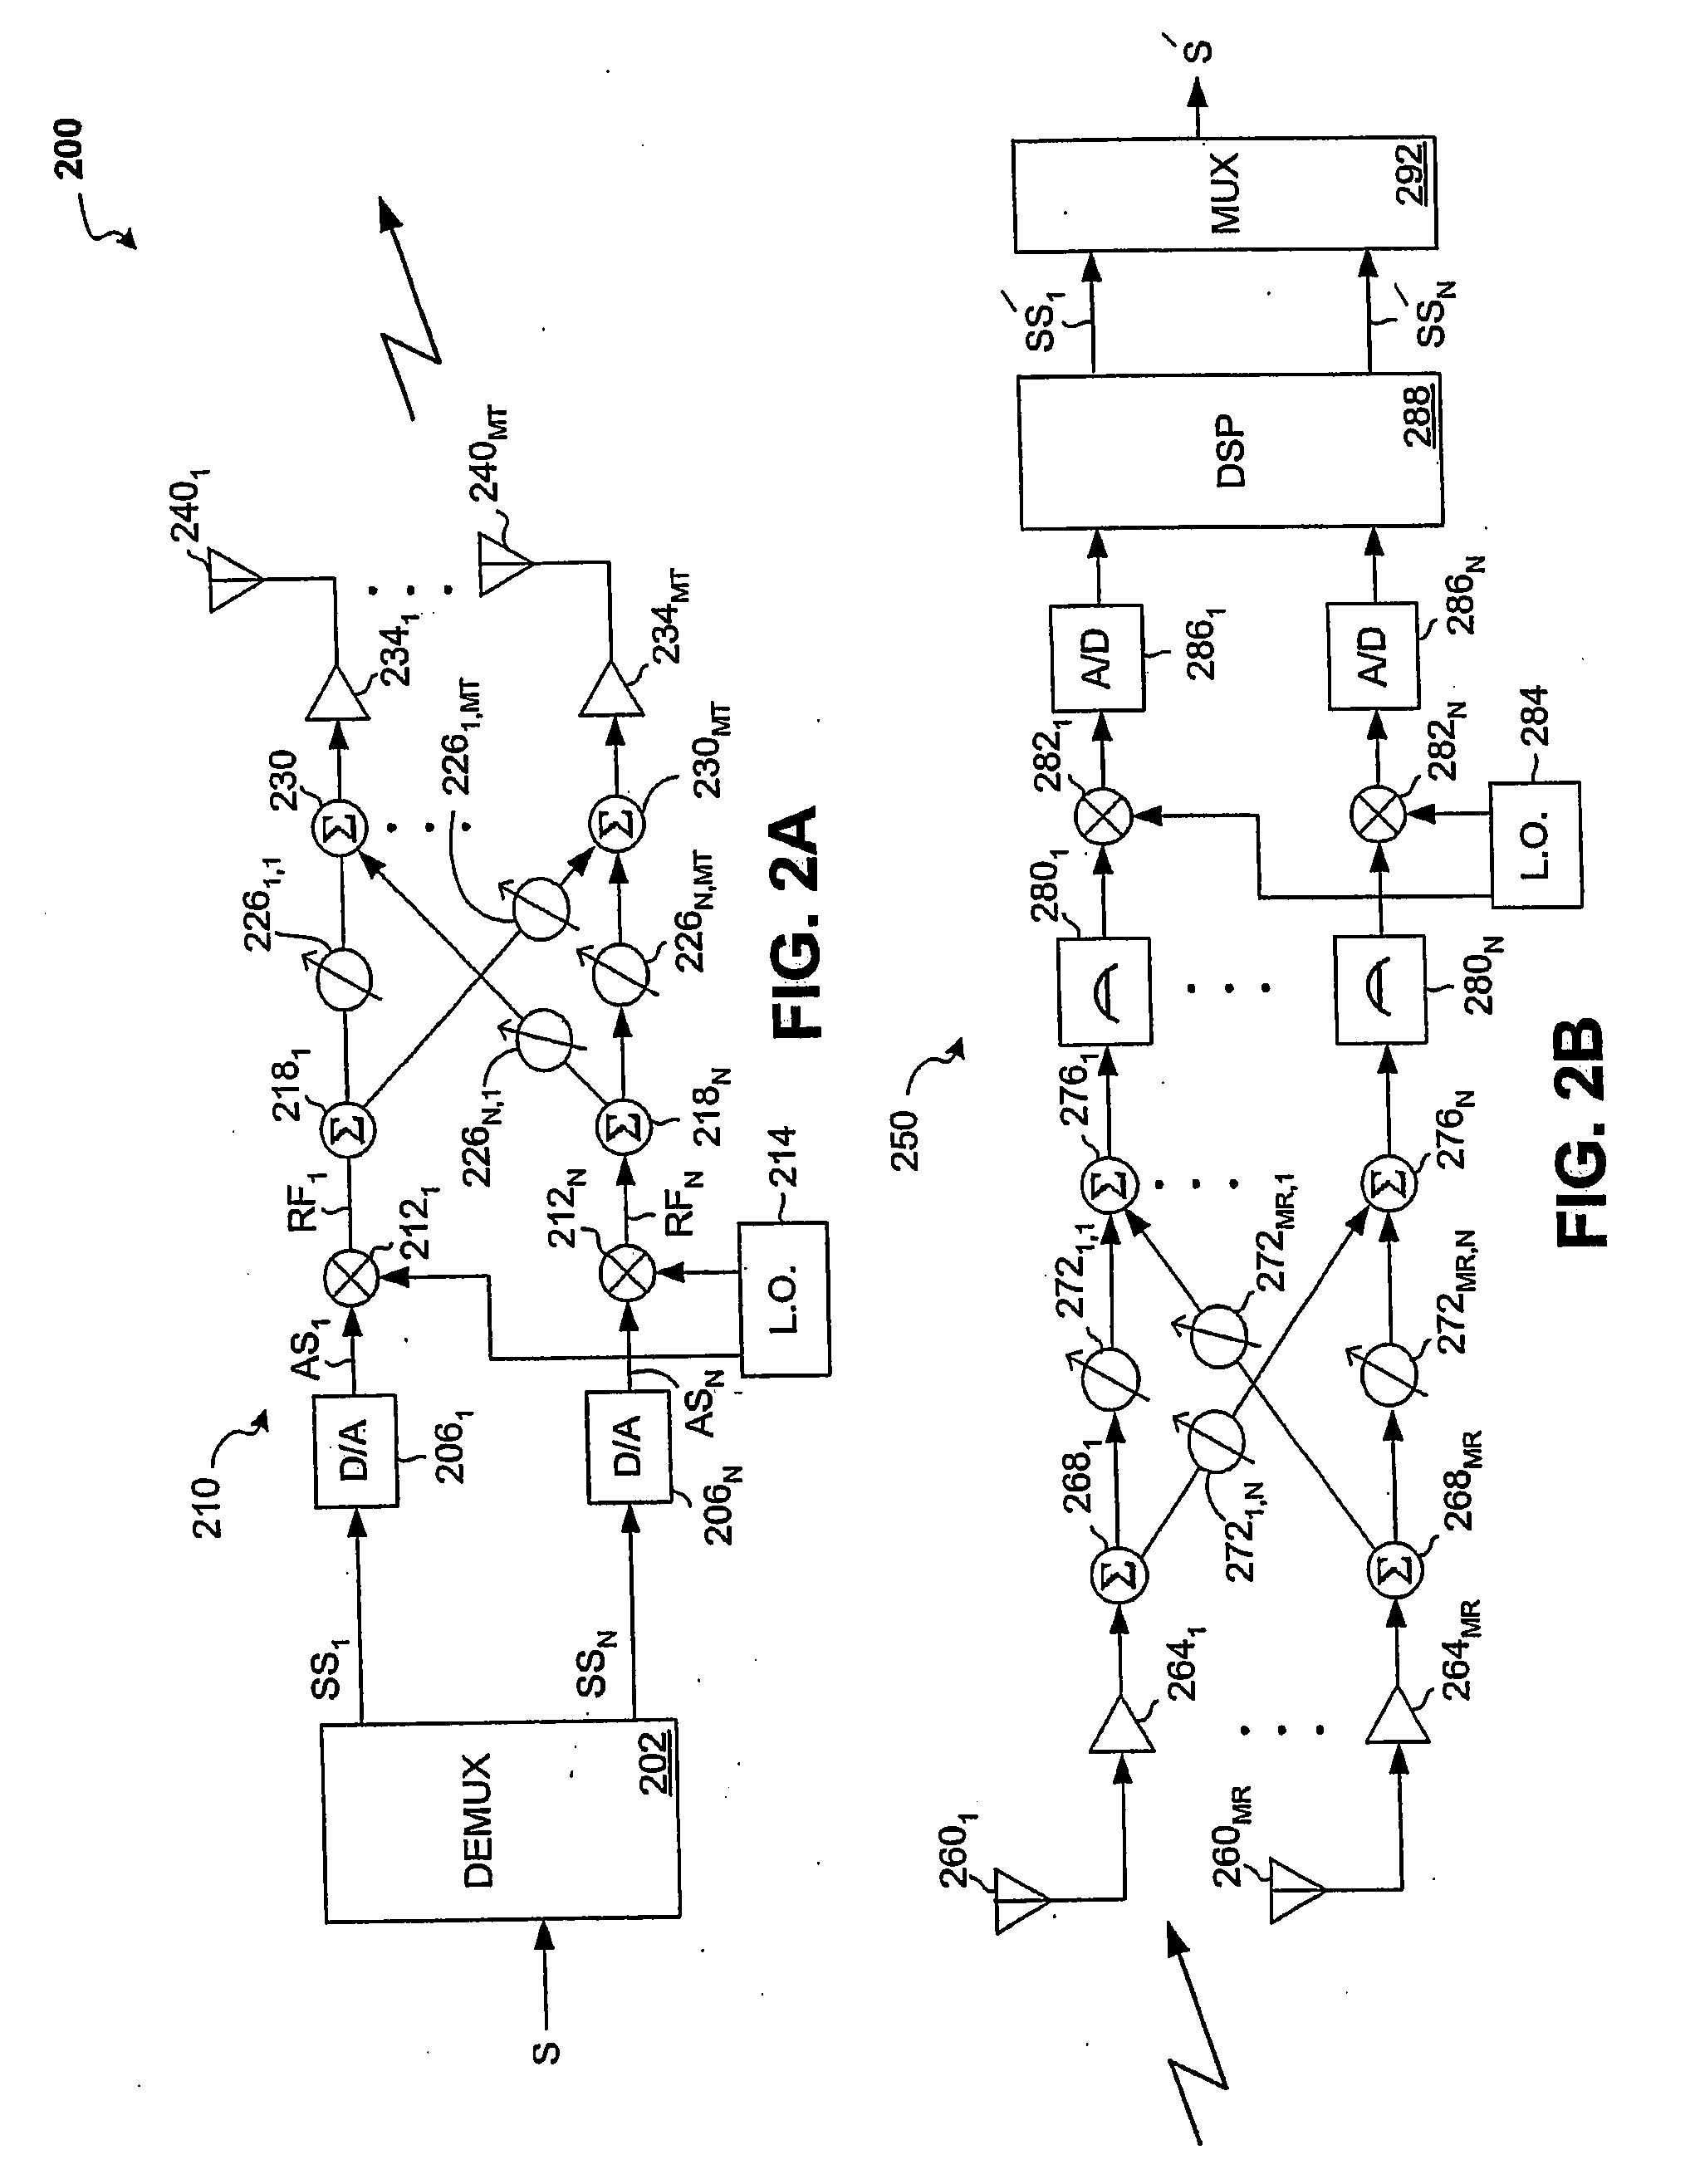 System and method for channel bonding in multiple antenna communication systems